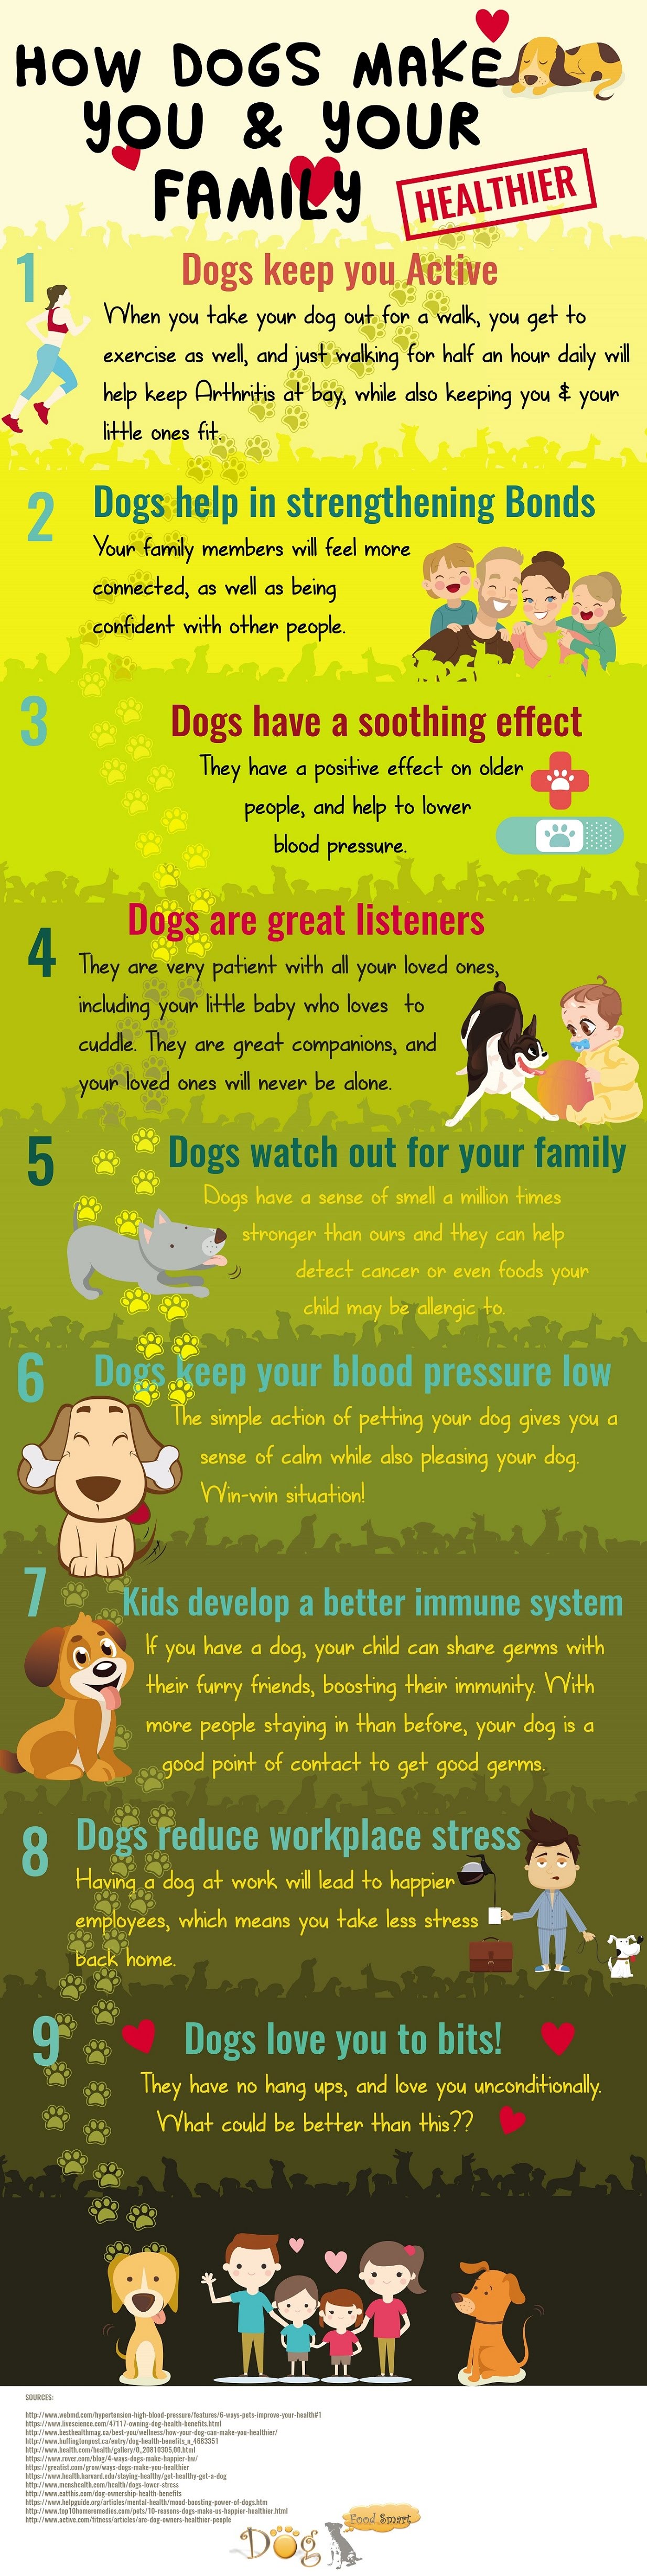 How Dogs Make You & Your Family Healthier #infographic